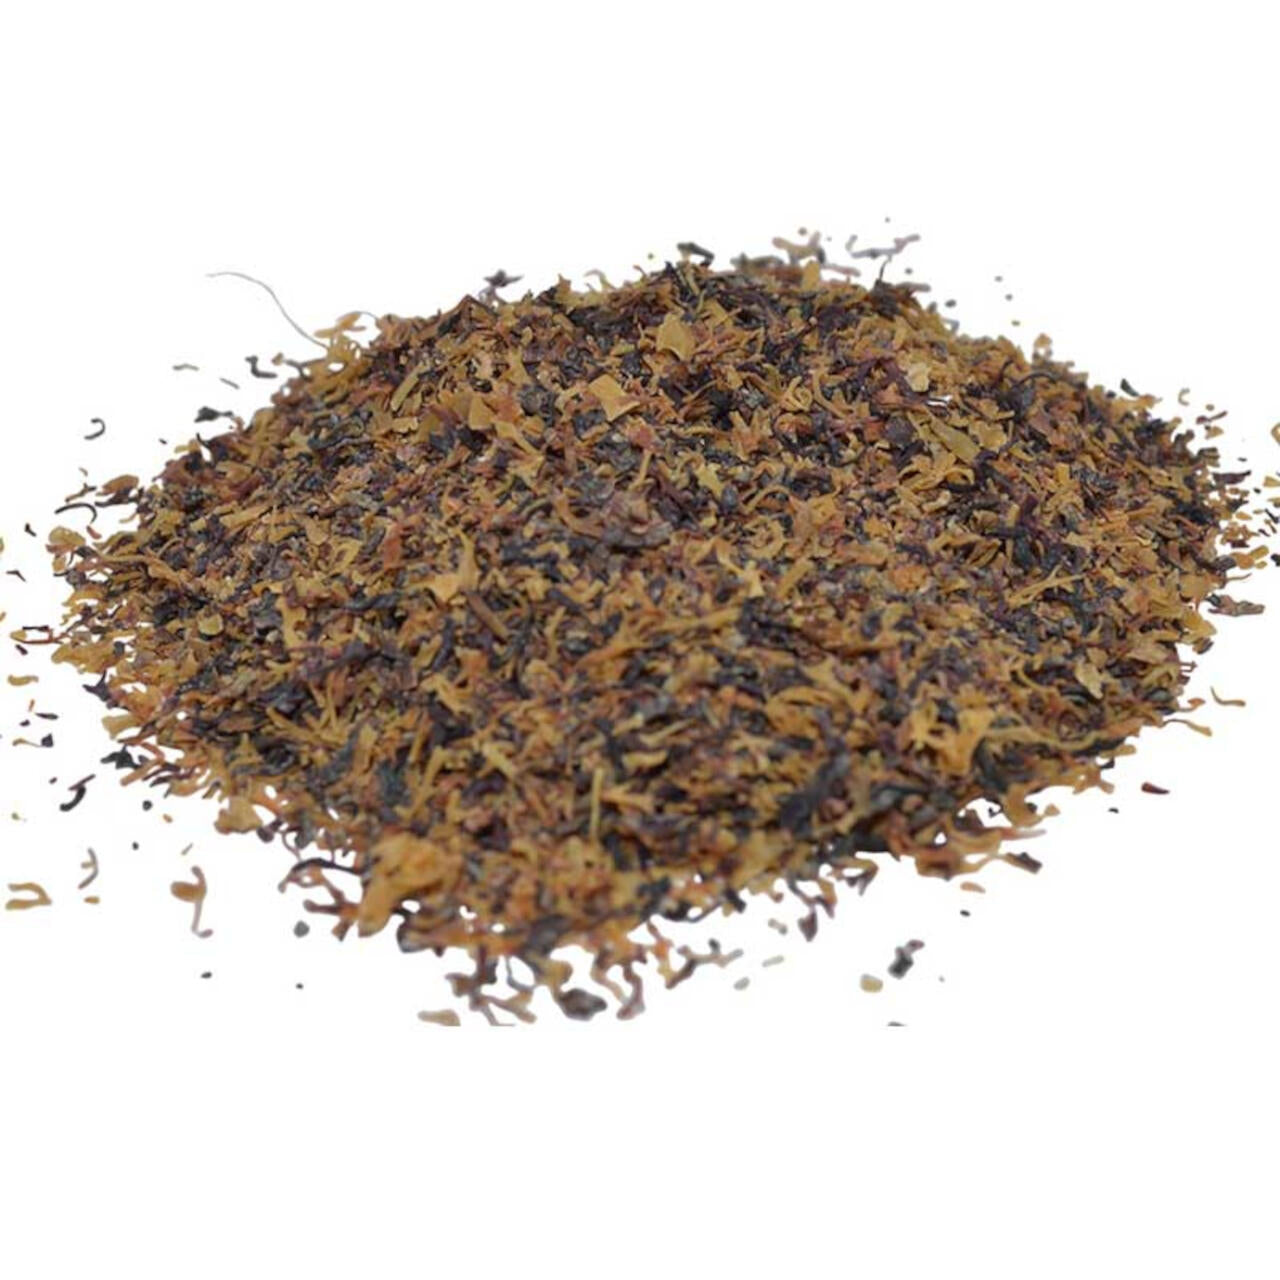 Irish Moss - Cut 1oz for Luck, Money, and Protection